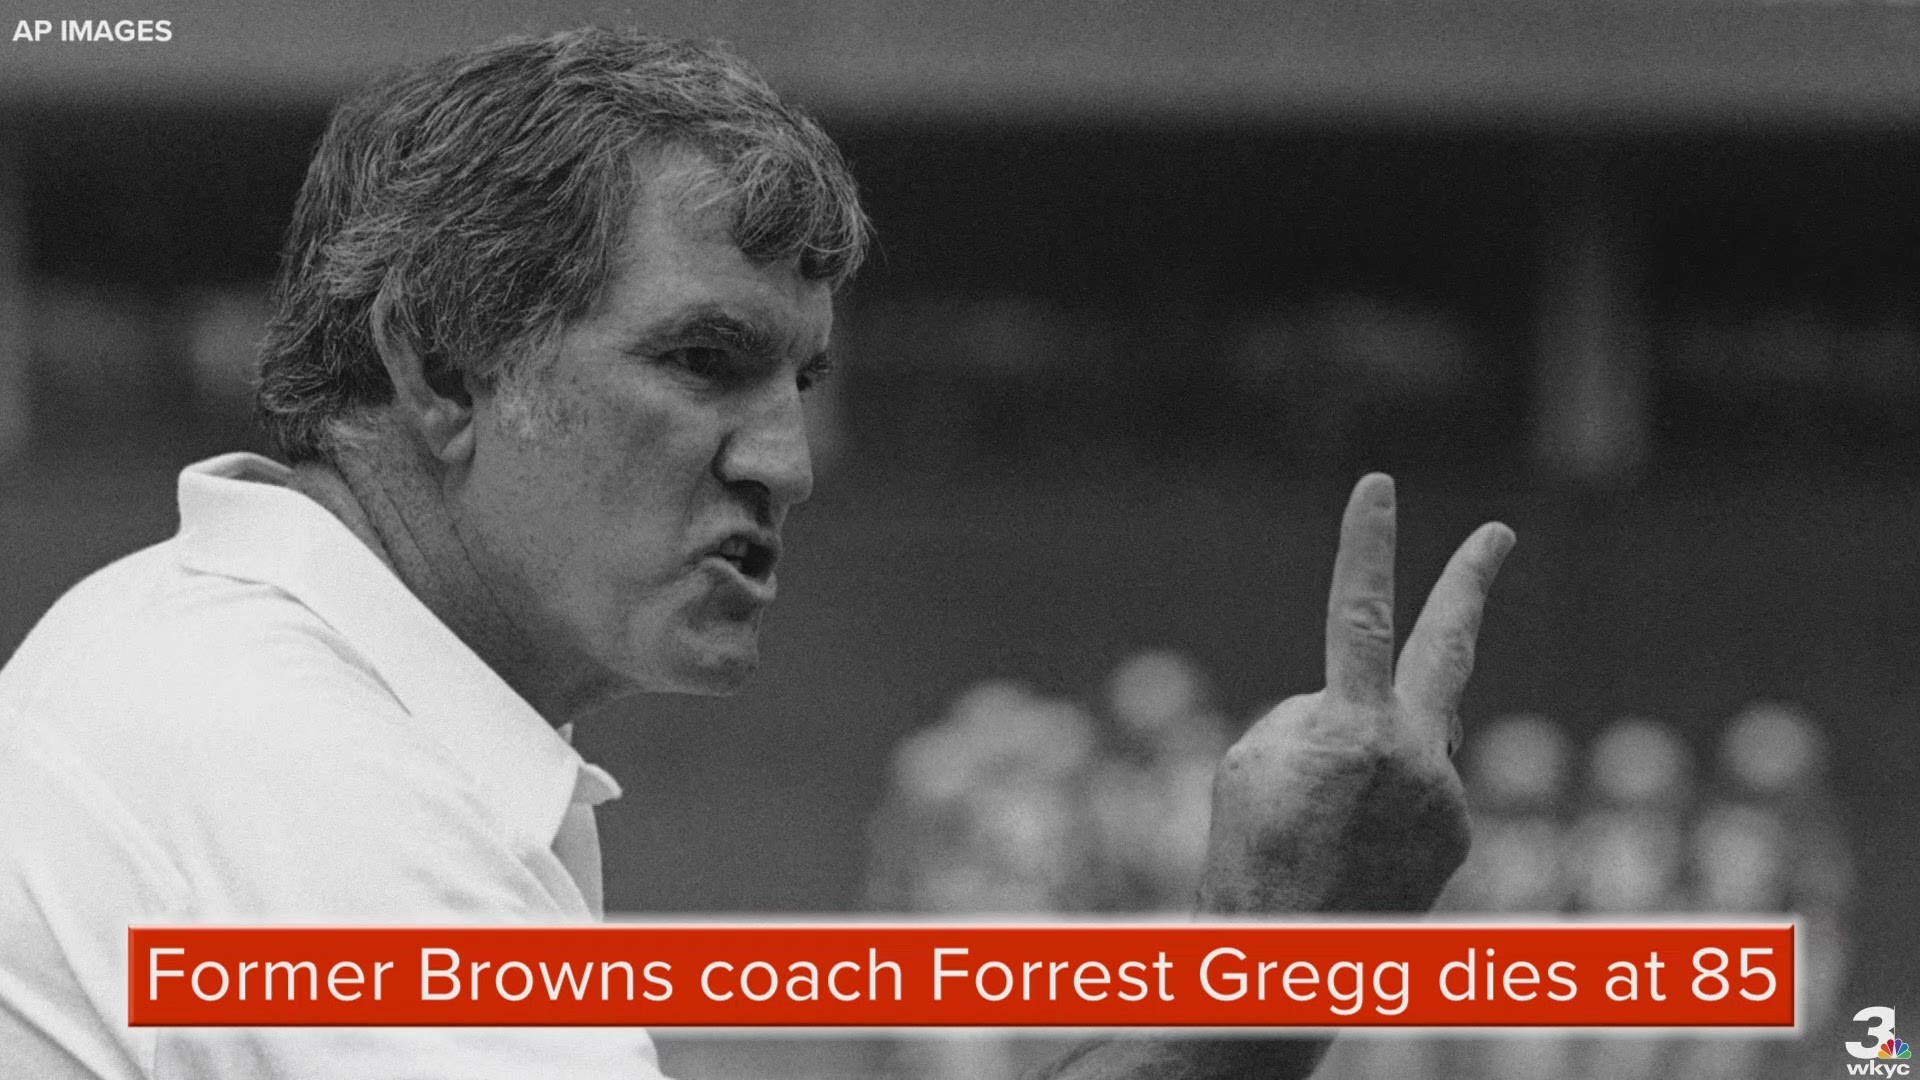 Gregg played in the NFL for 16 years and served as a head coach for another 11.